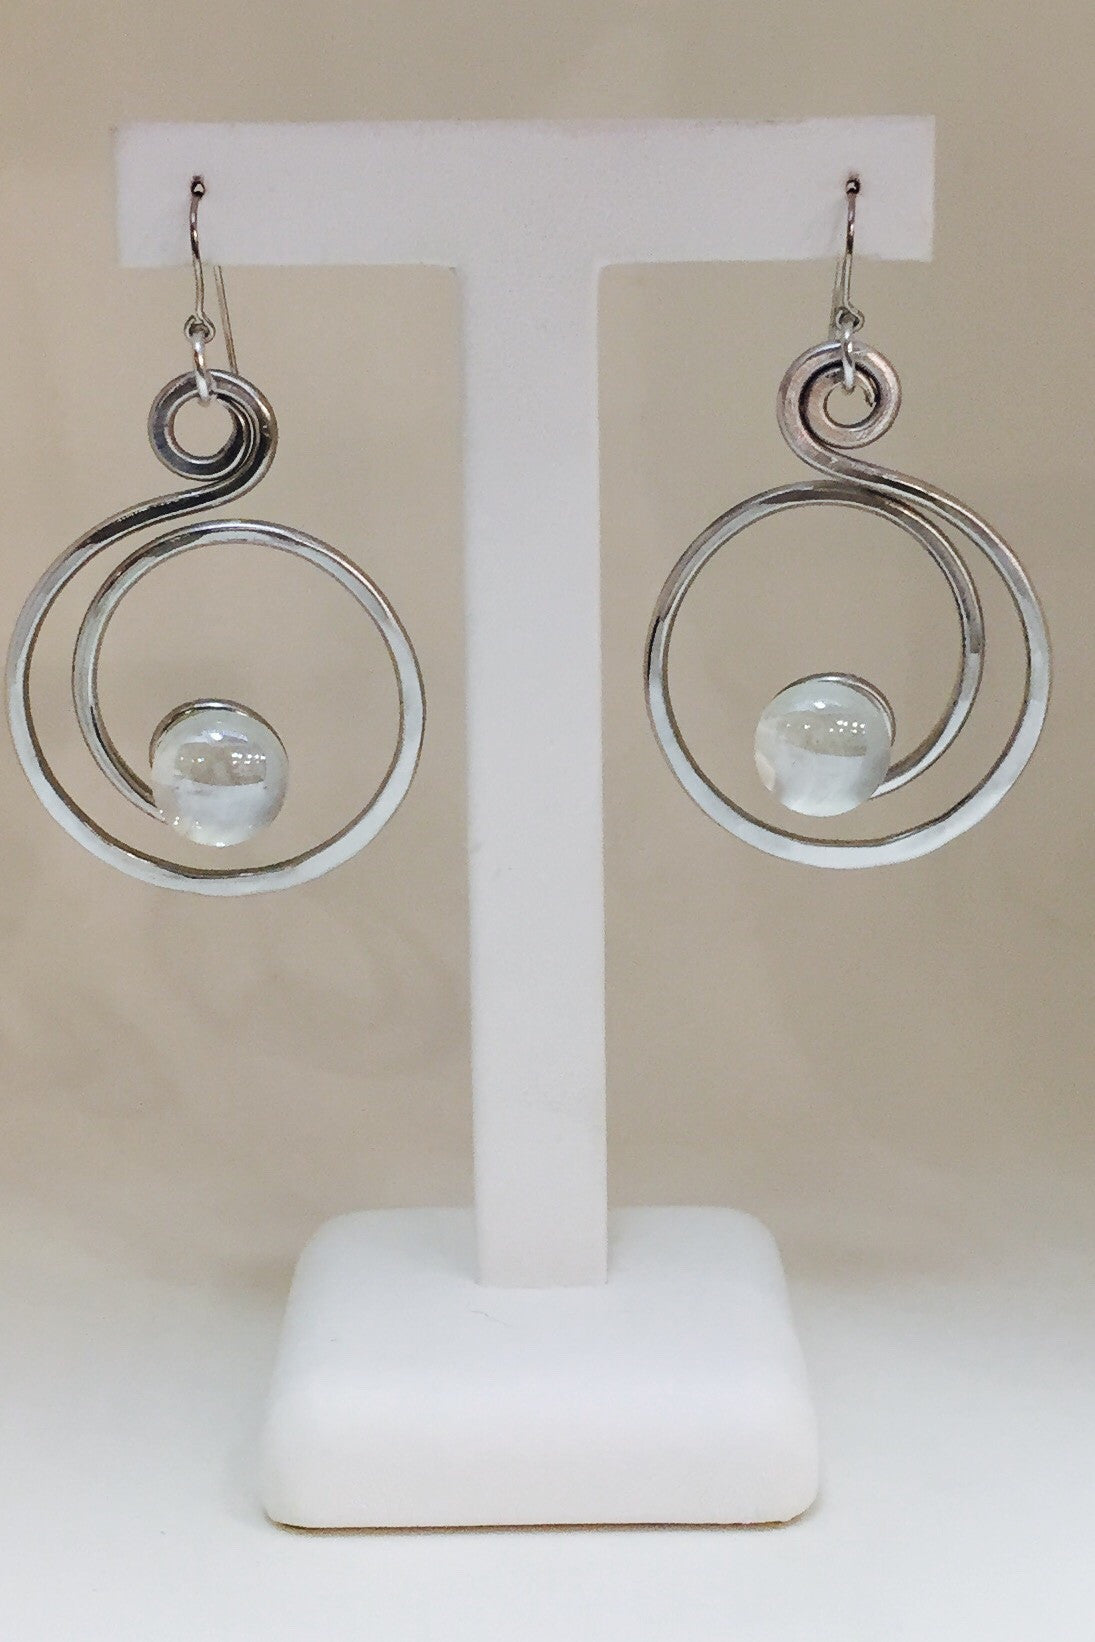 Open Curly Q Earring with White Stone